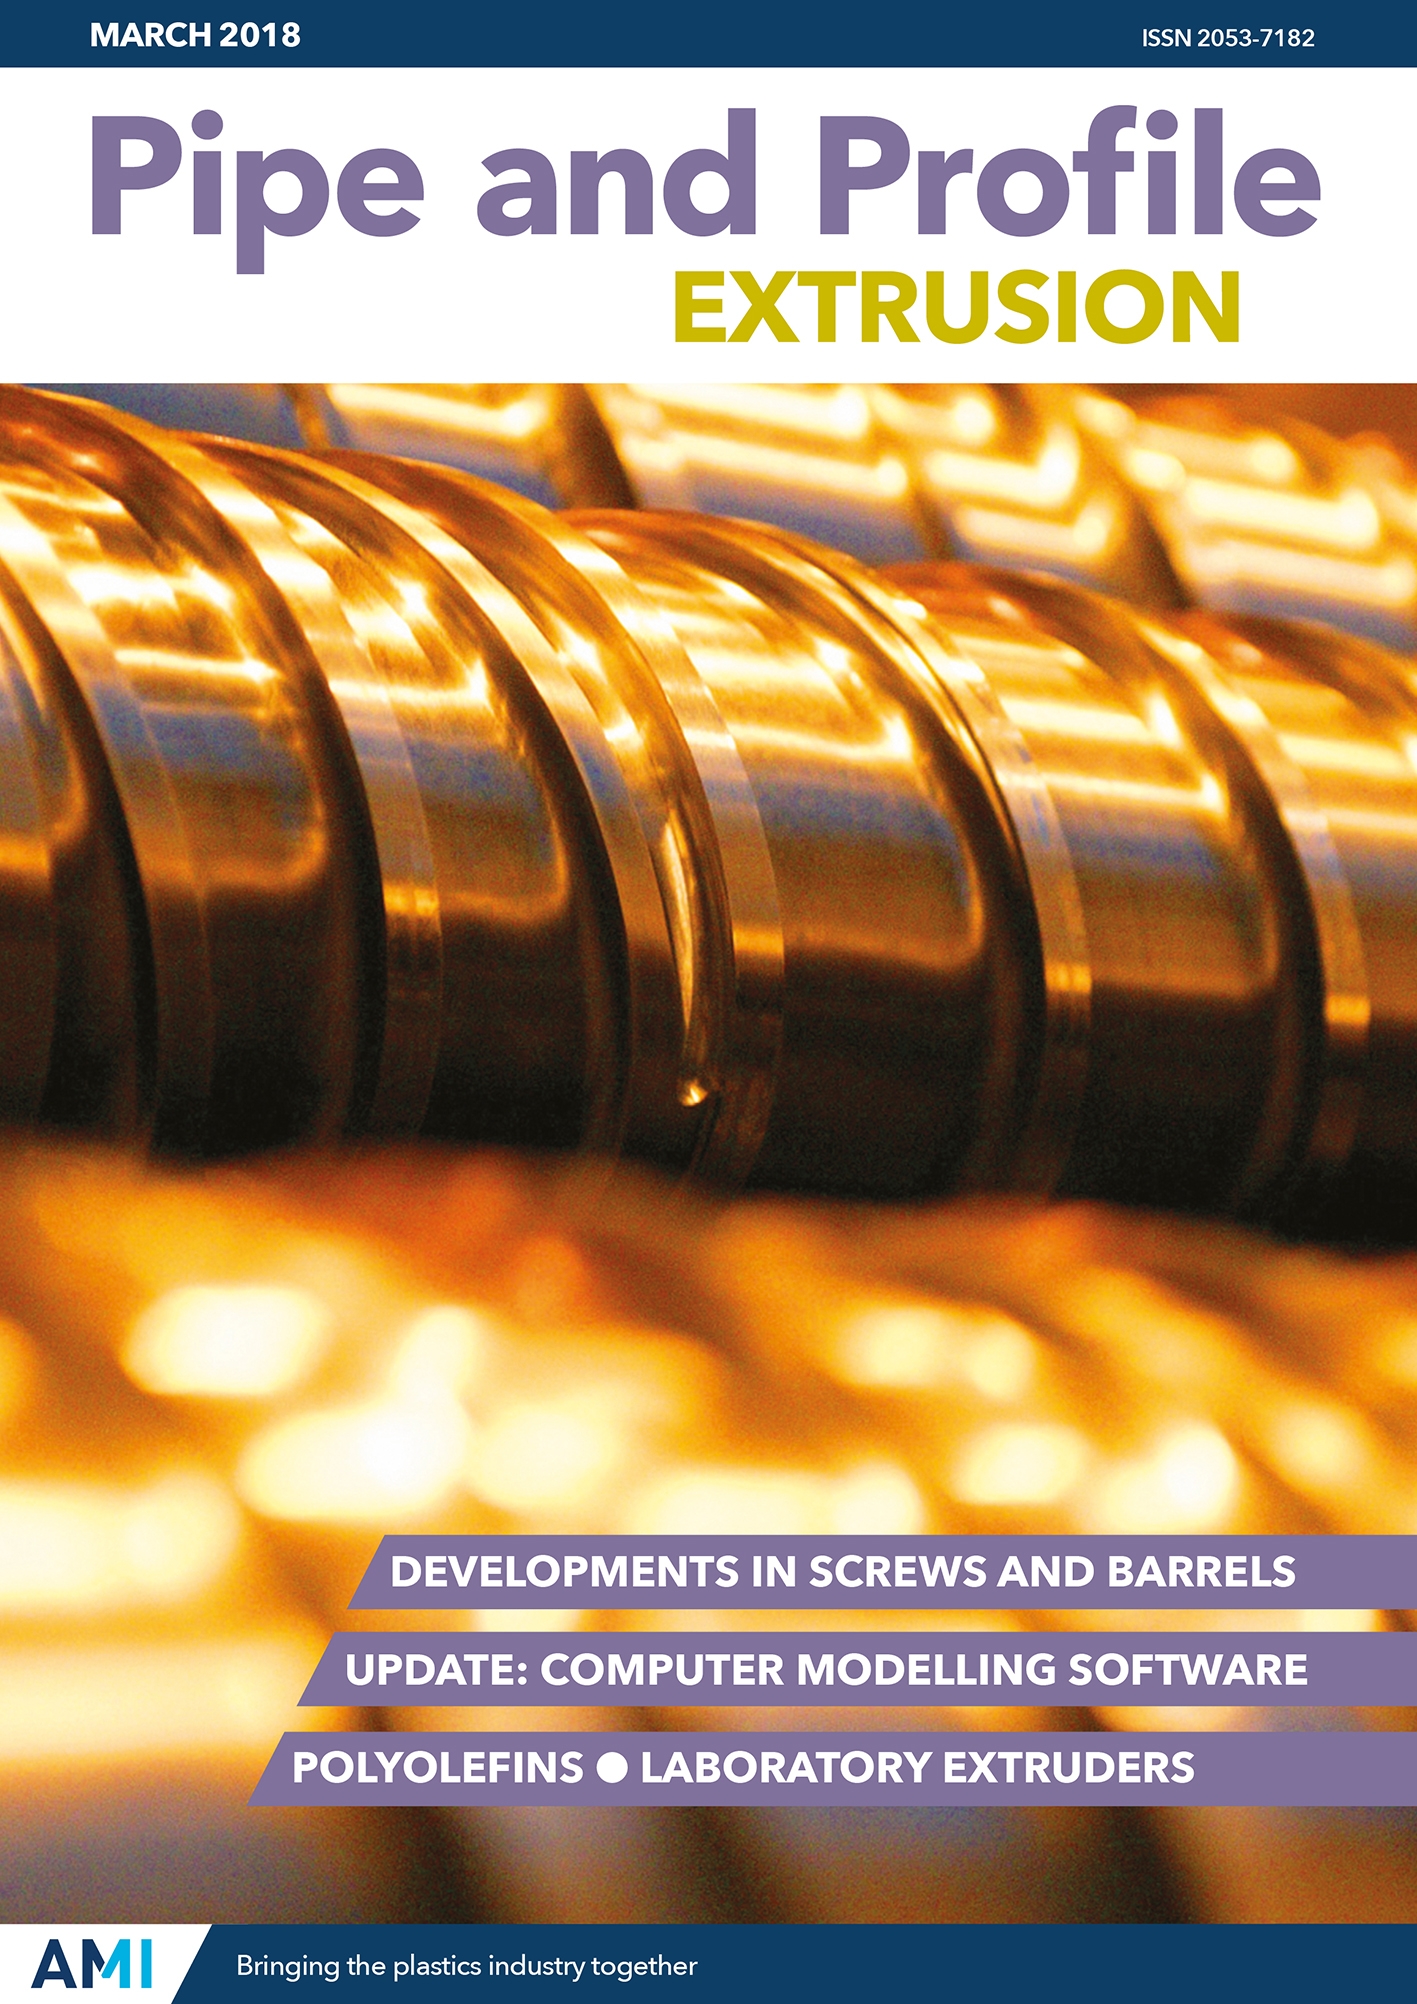 Pipe and Profile Extrusion March 2018